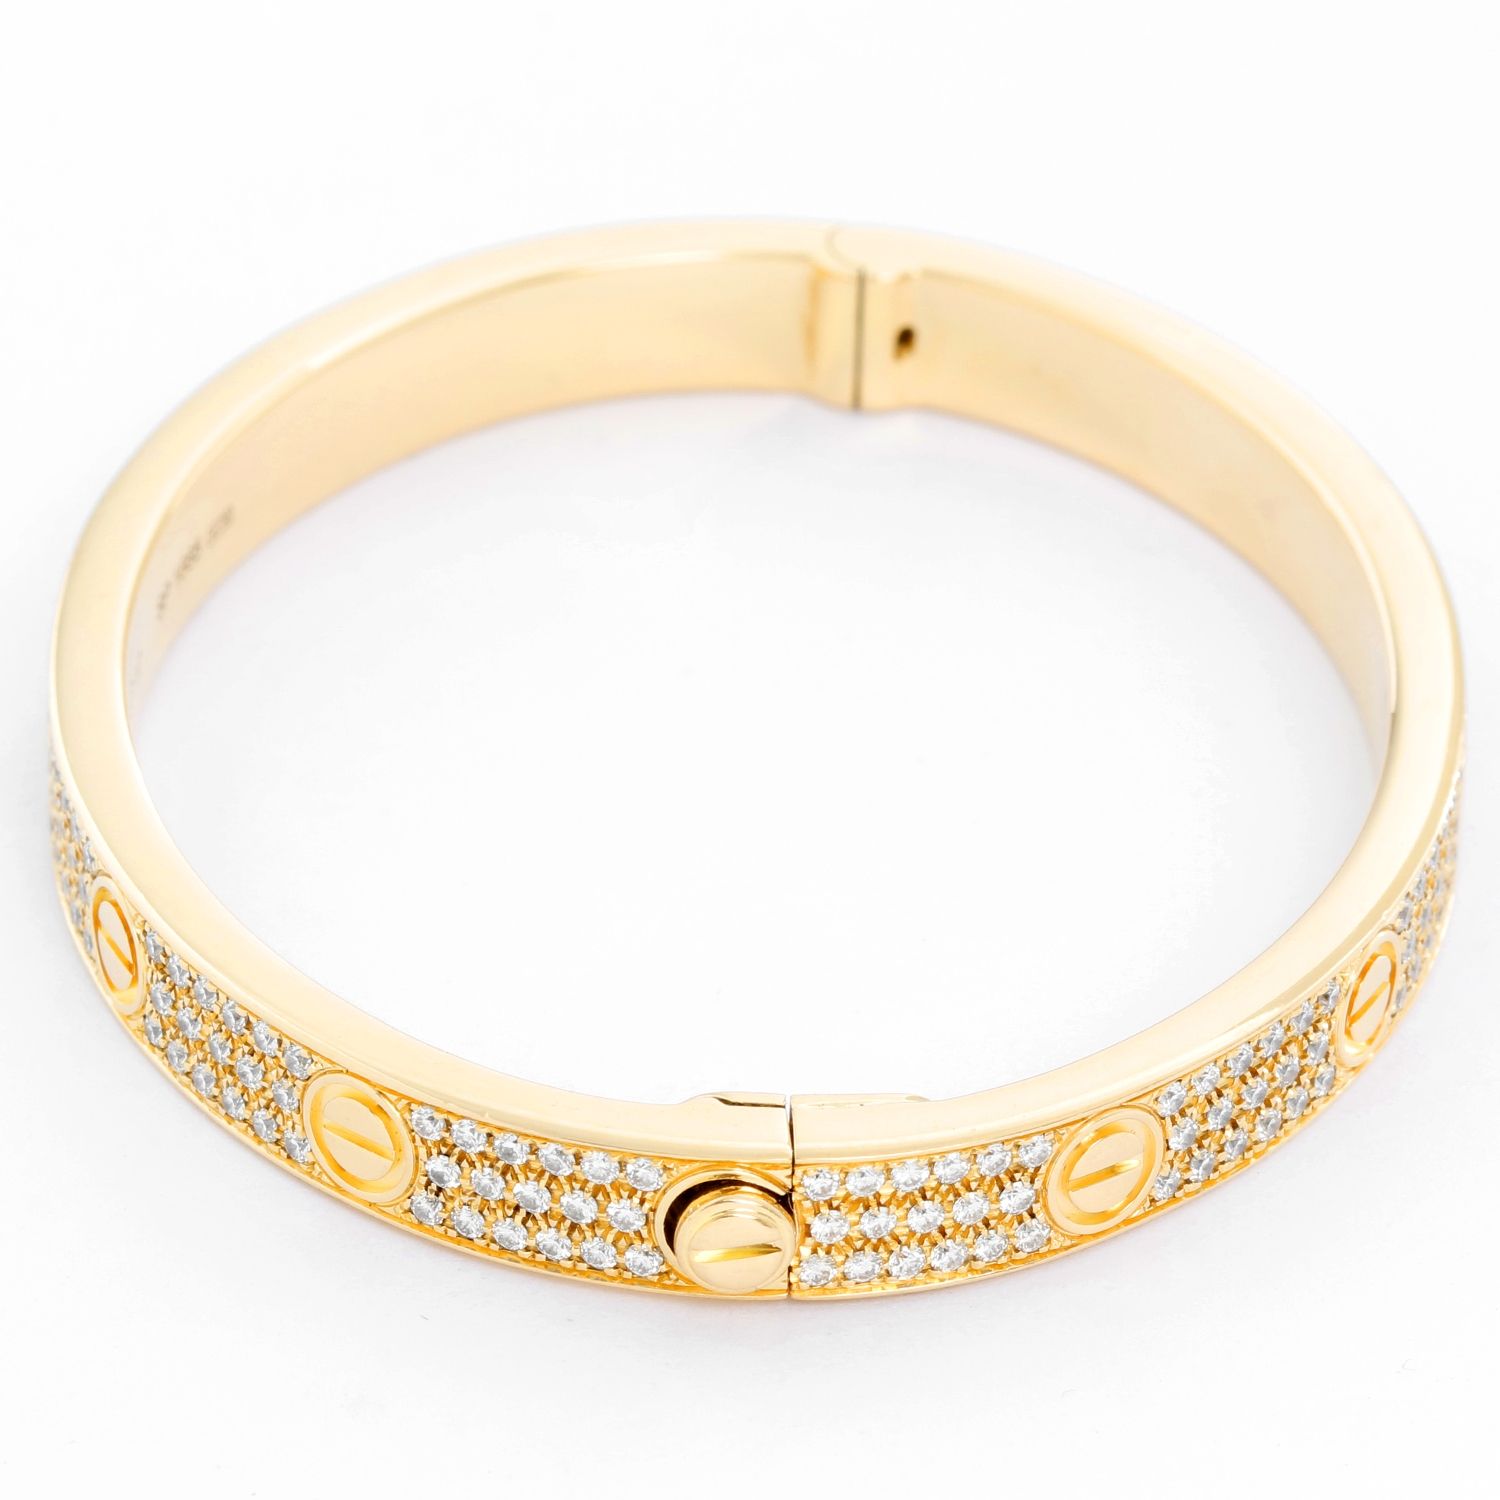 Cartier Love Bracelet 18k Yellow Gold Size 18 with Screwdriver